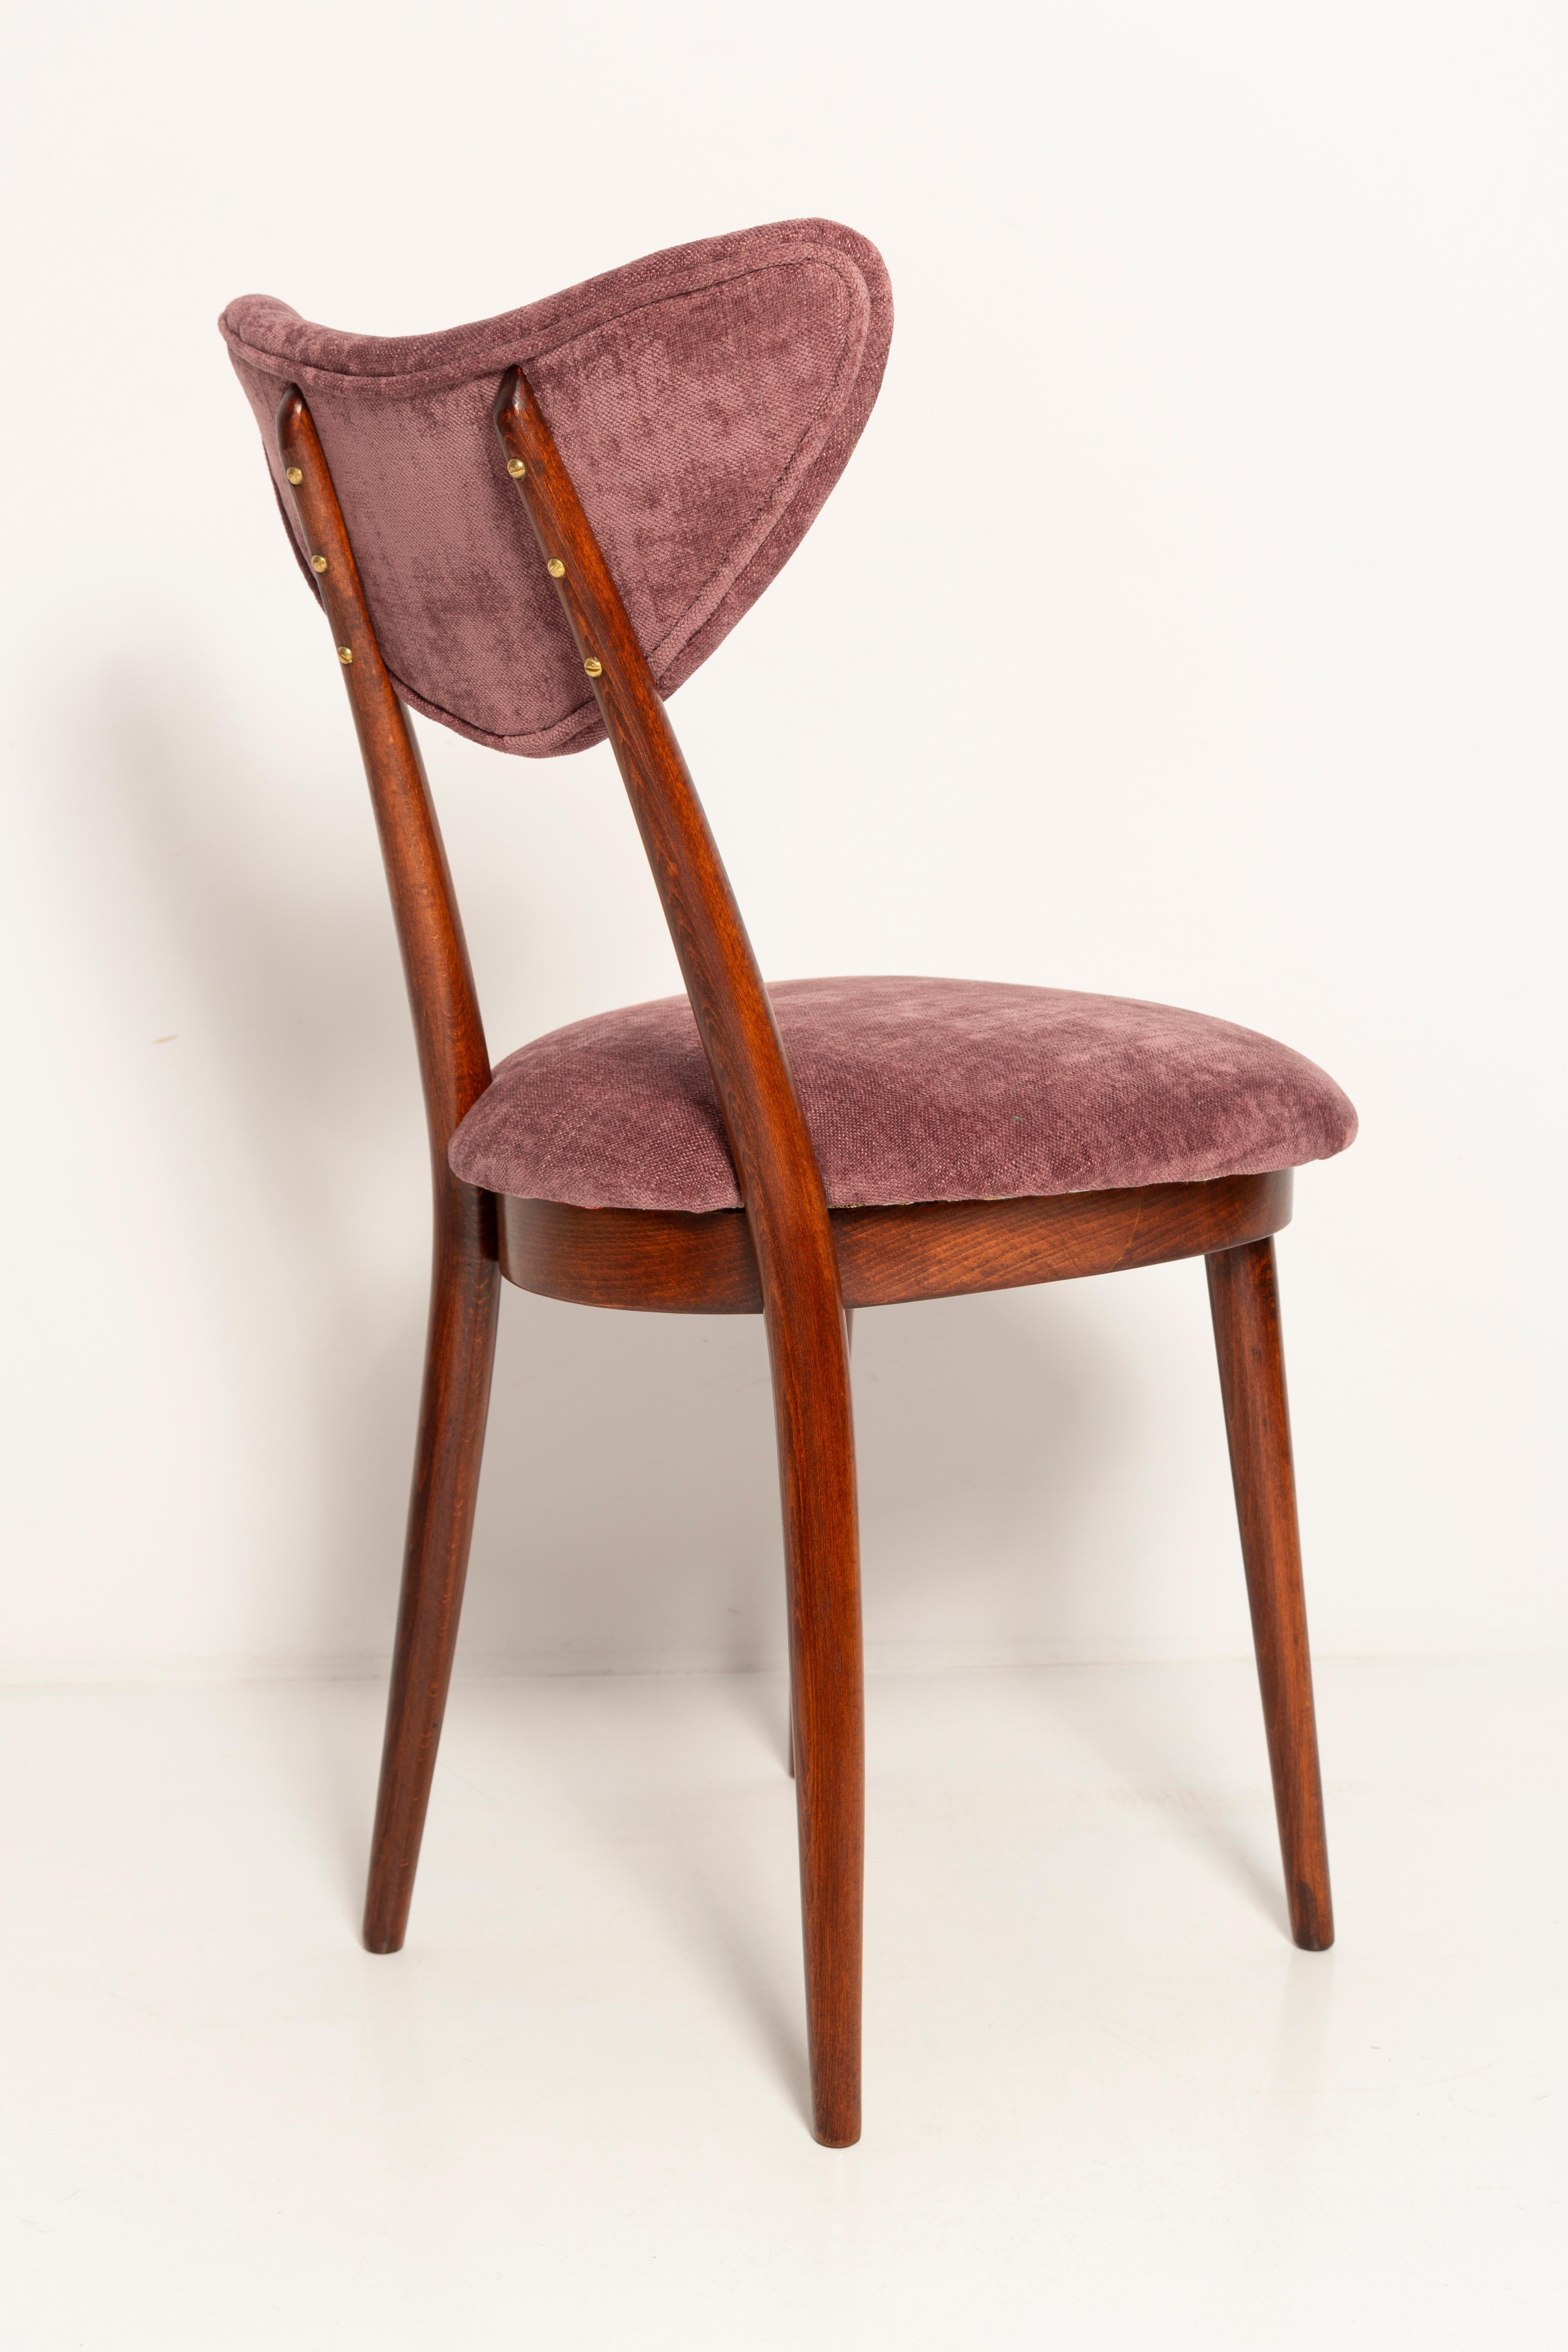 Set of Six Midcentury Burgundy Pink Velvet Heart Chairs, Europe, 1960s For Sale 3